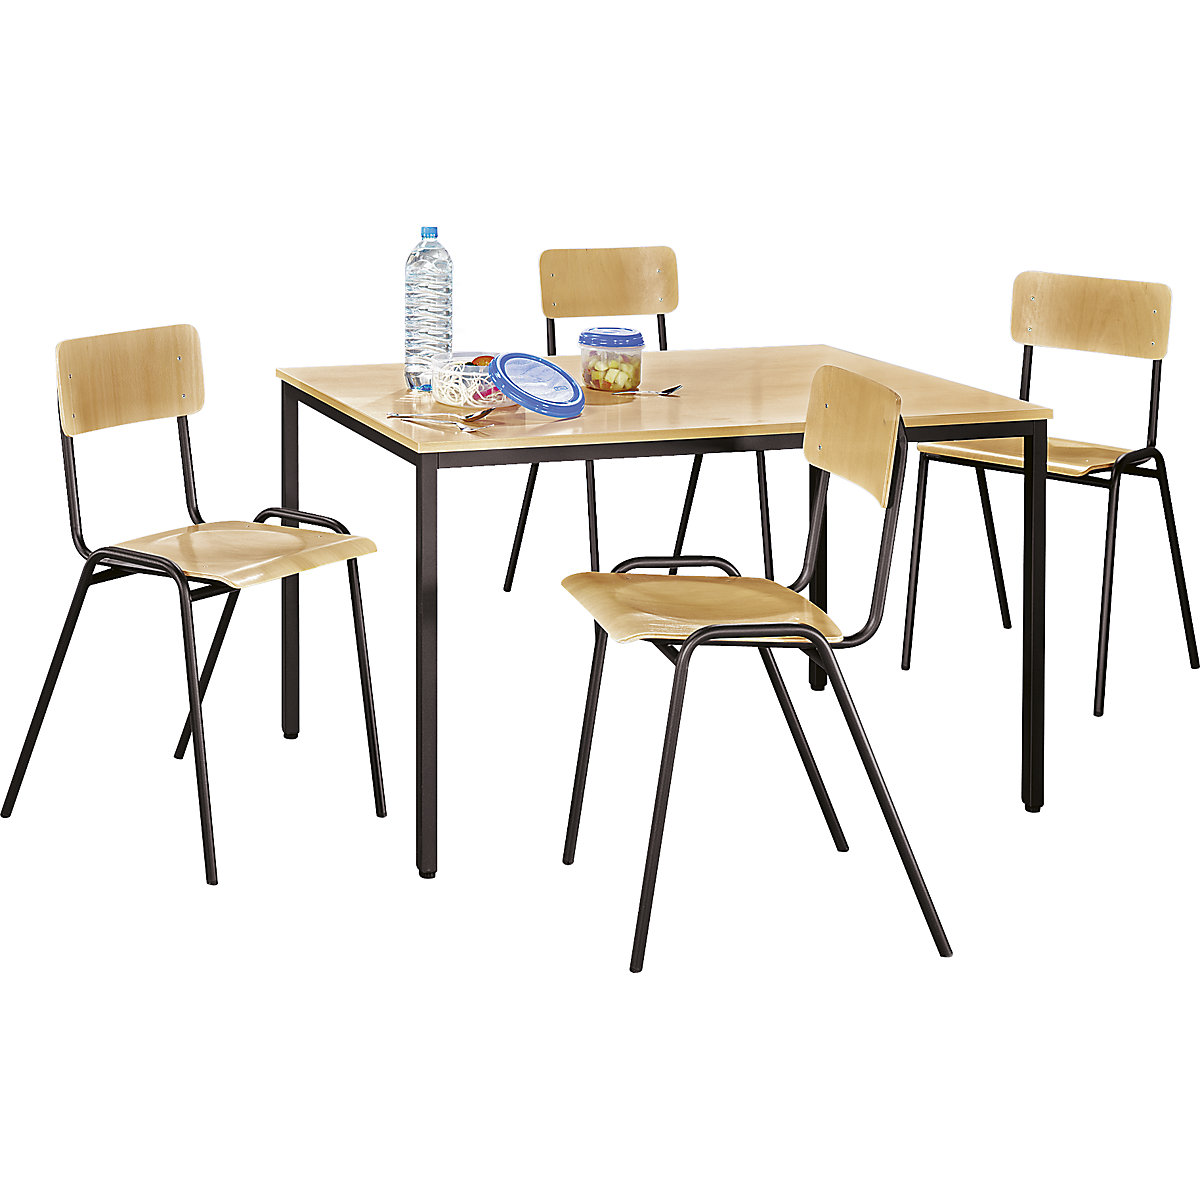 EUROKRAFTbasic – Multi-purpose seating unit, 1 table, 4 chairs, tabletop in beech finish, grey brown frame